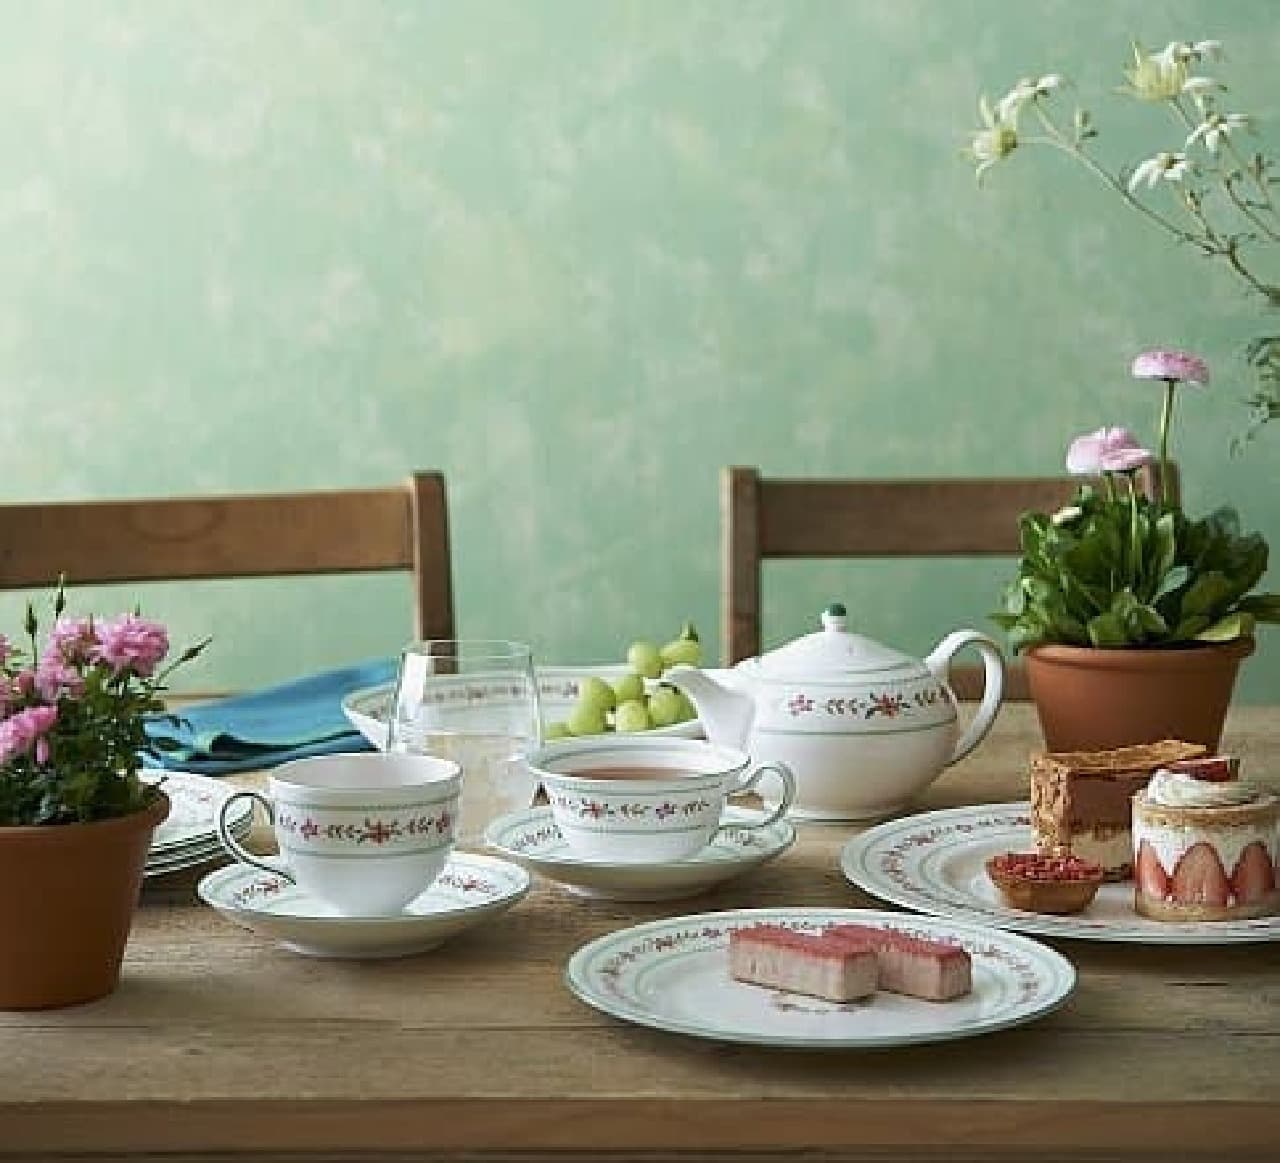 WEDGWOOD "Bell Rose" with the theme of English garden